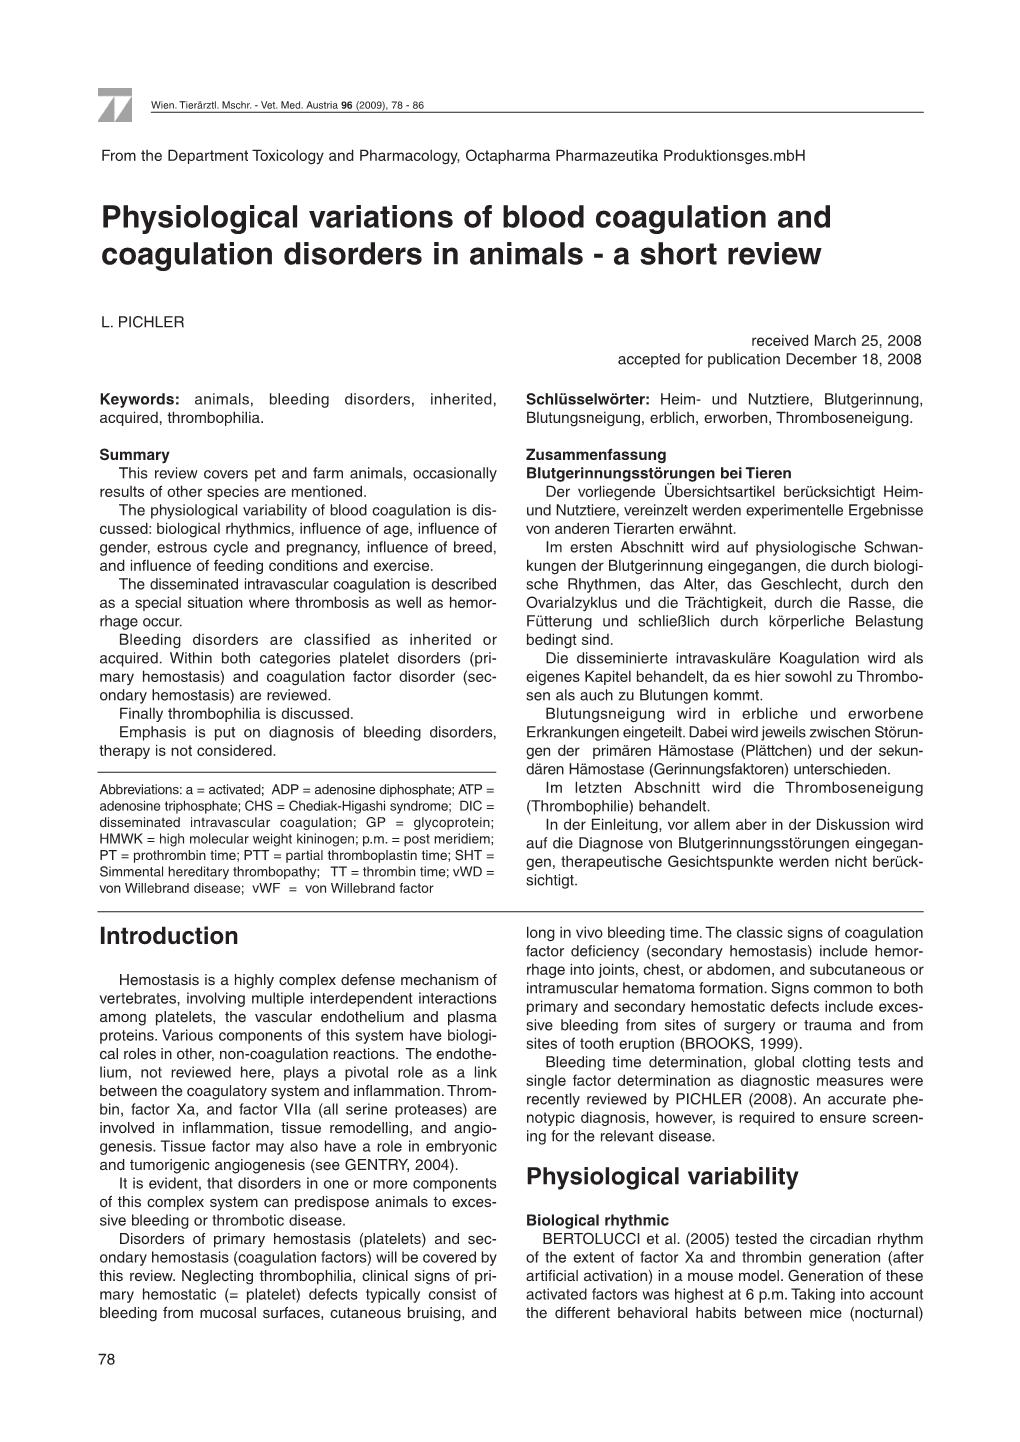 Physiological Variations of Blood Coagulation and Coagulation Disorders in Animals - a Short Review